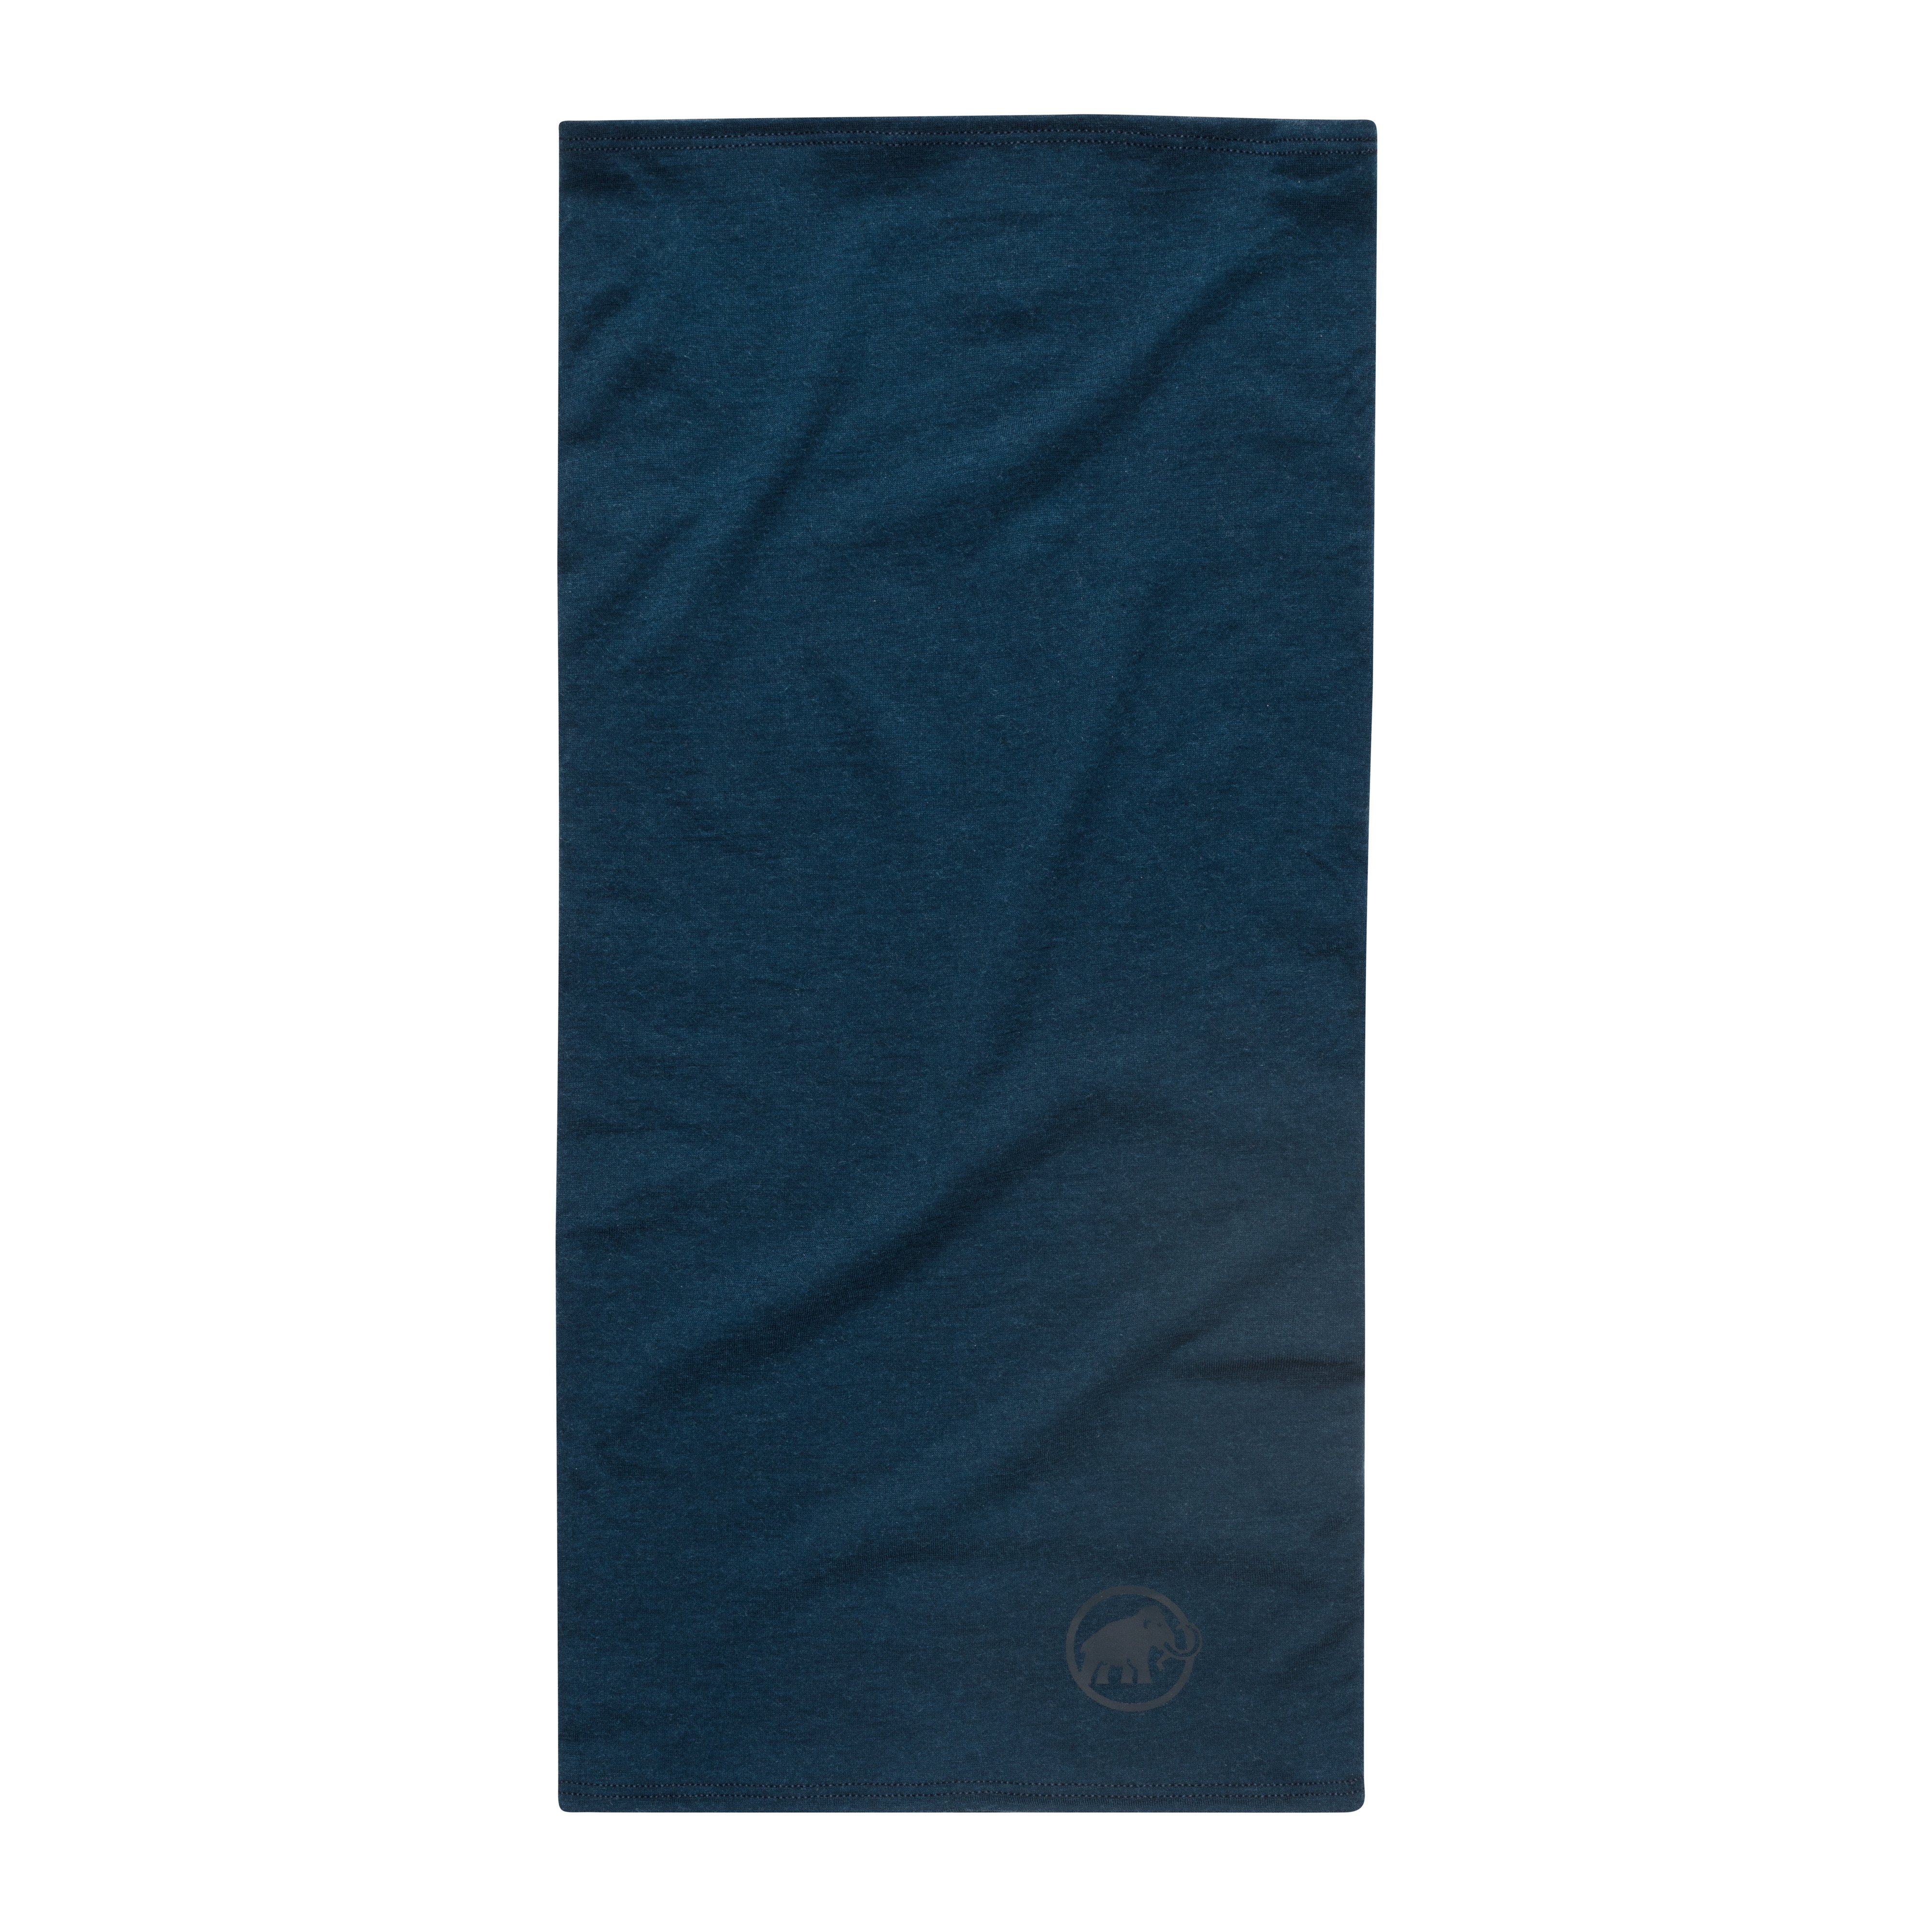 Merino Neck Gaiter - wing teal, one size product image